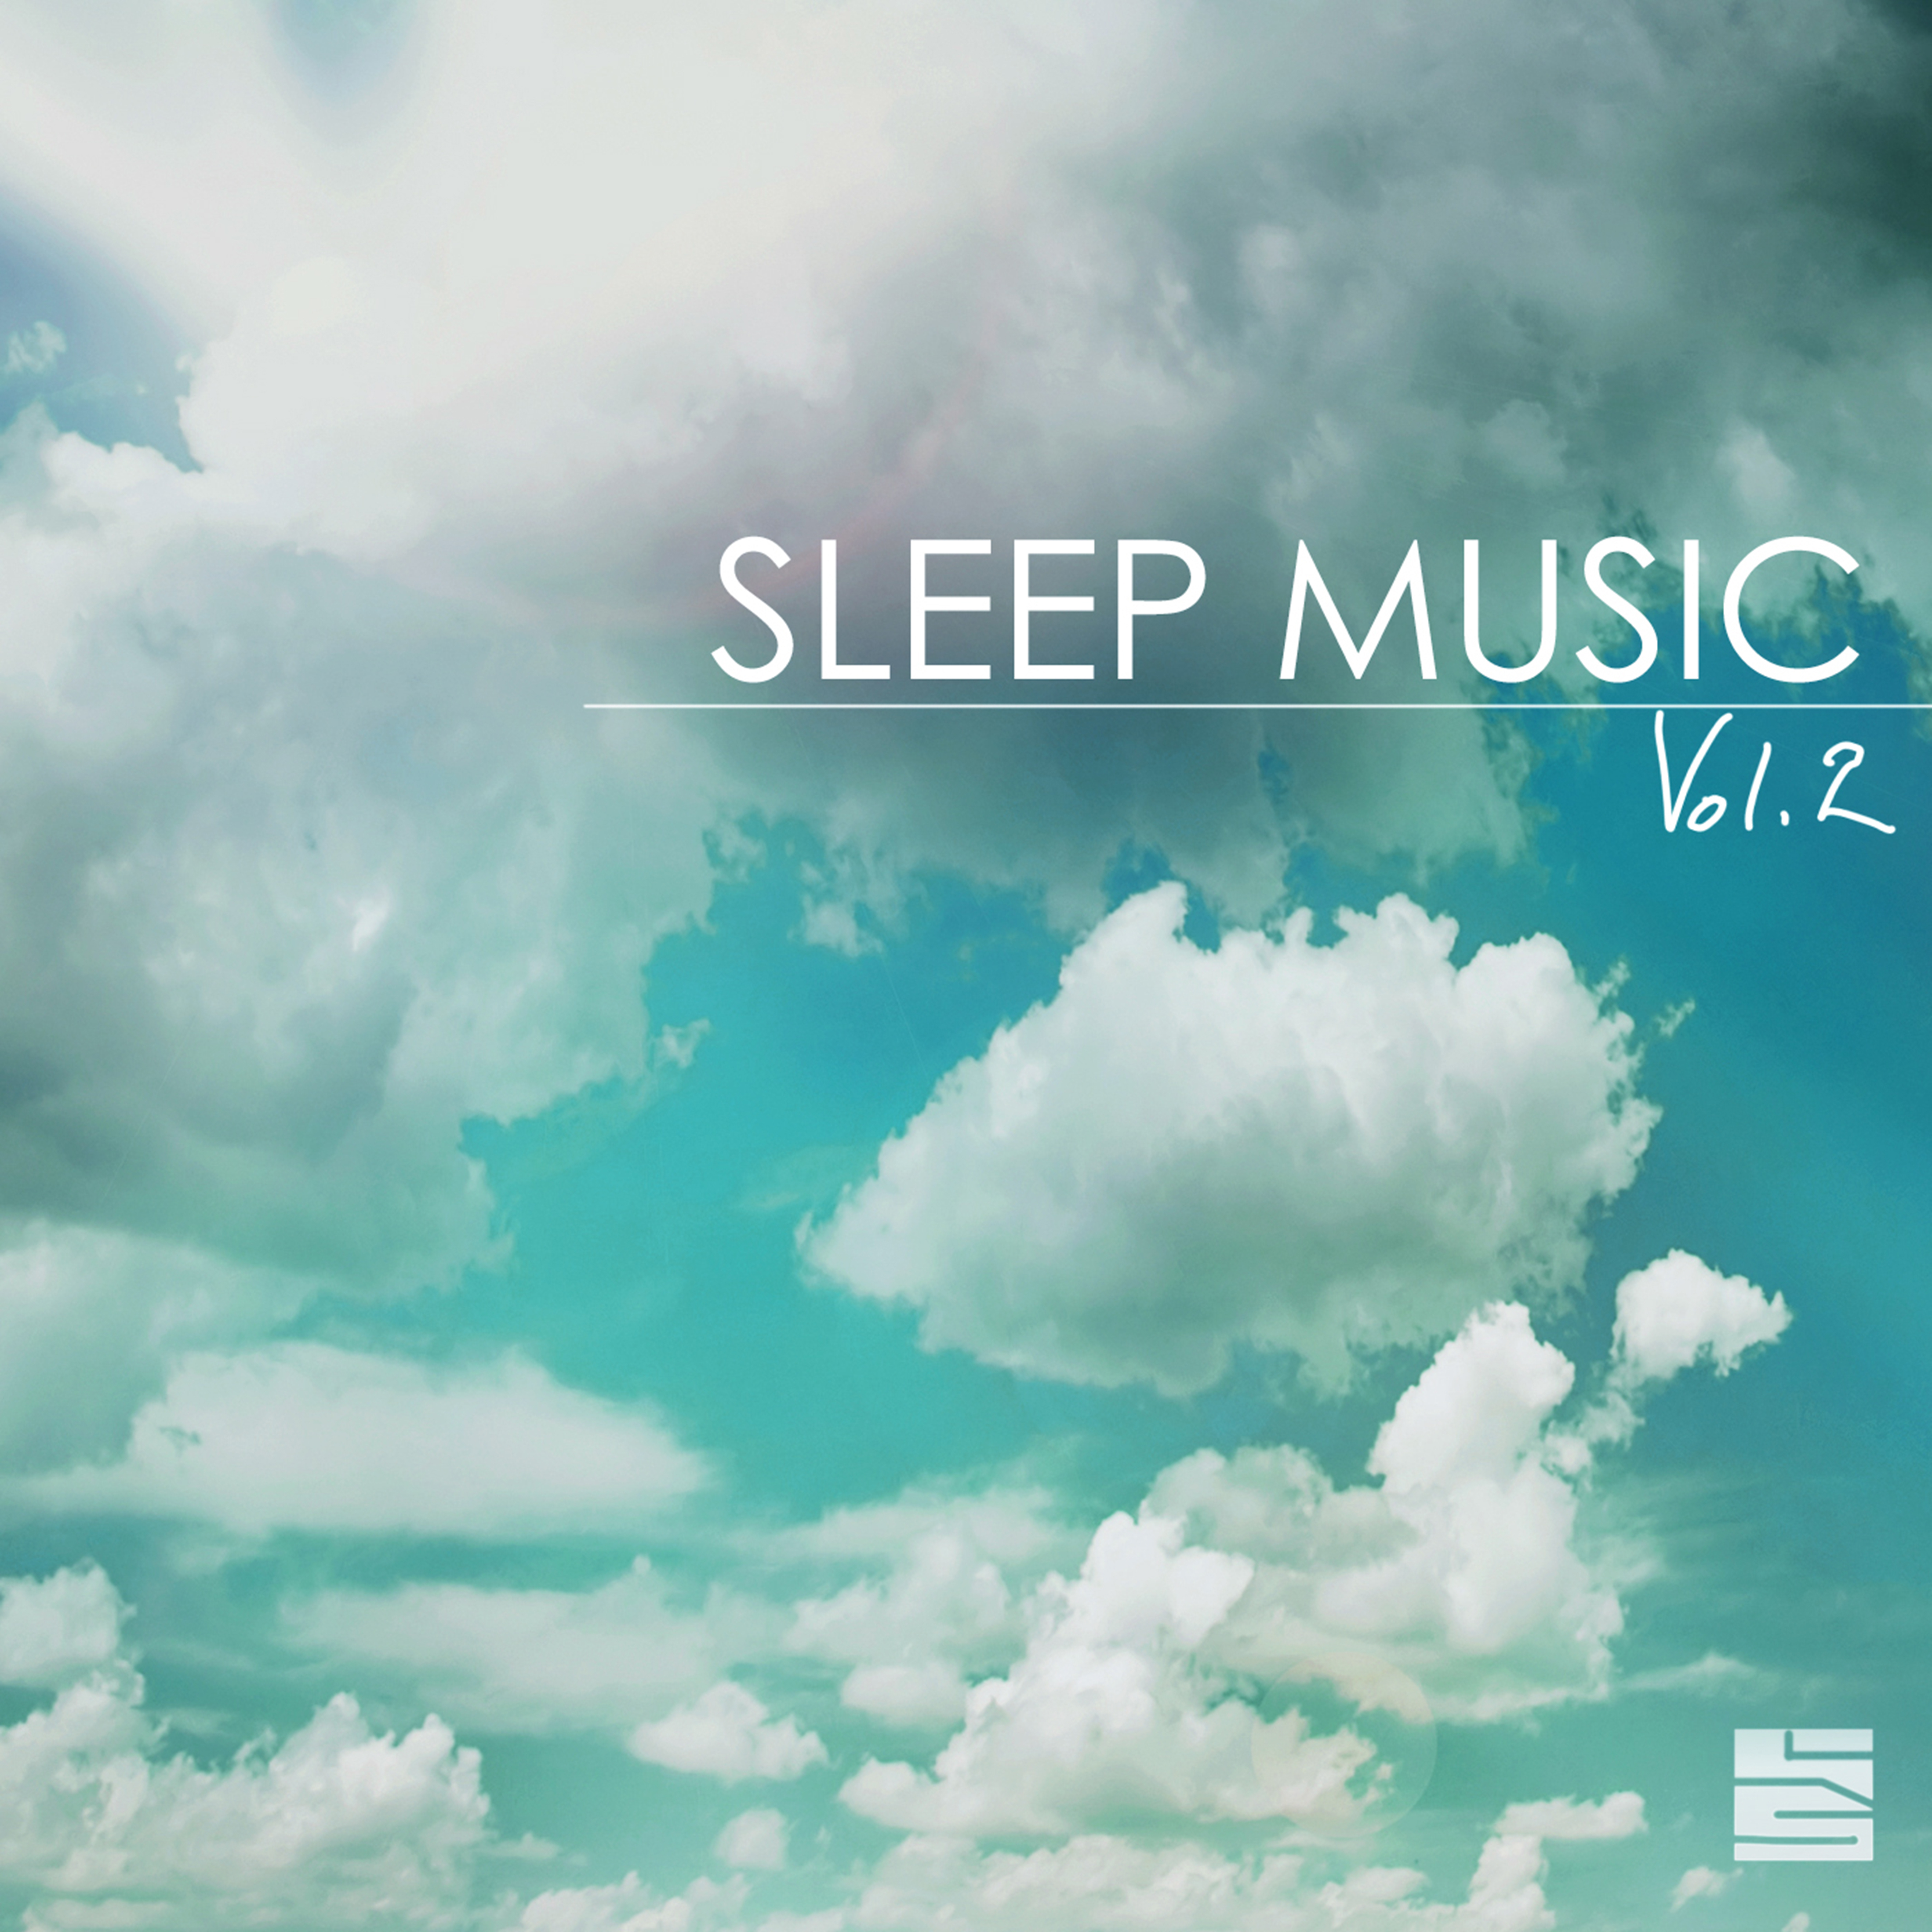 Sleep Music & Music for Deep Sleep With Nature Sounds and Relaxing Sounds of Nature, Vol. 2 - Instrumental New Age Music for Sleeping & Baby Sleep, Sound Therapy 4 Sleep Solutions & Meditation